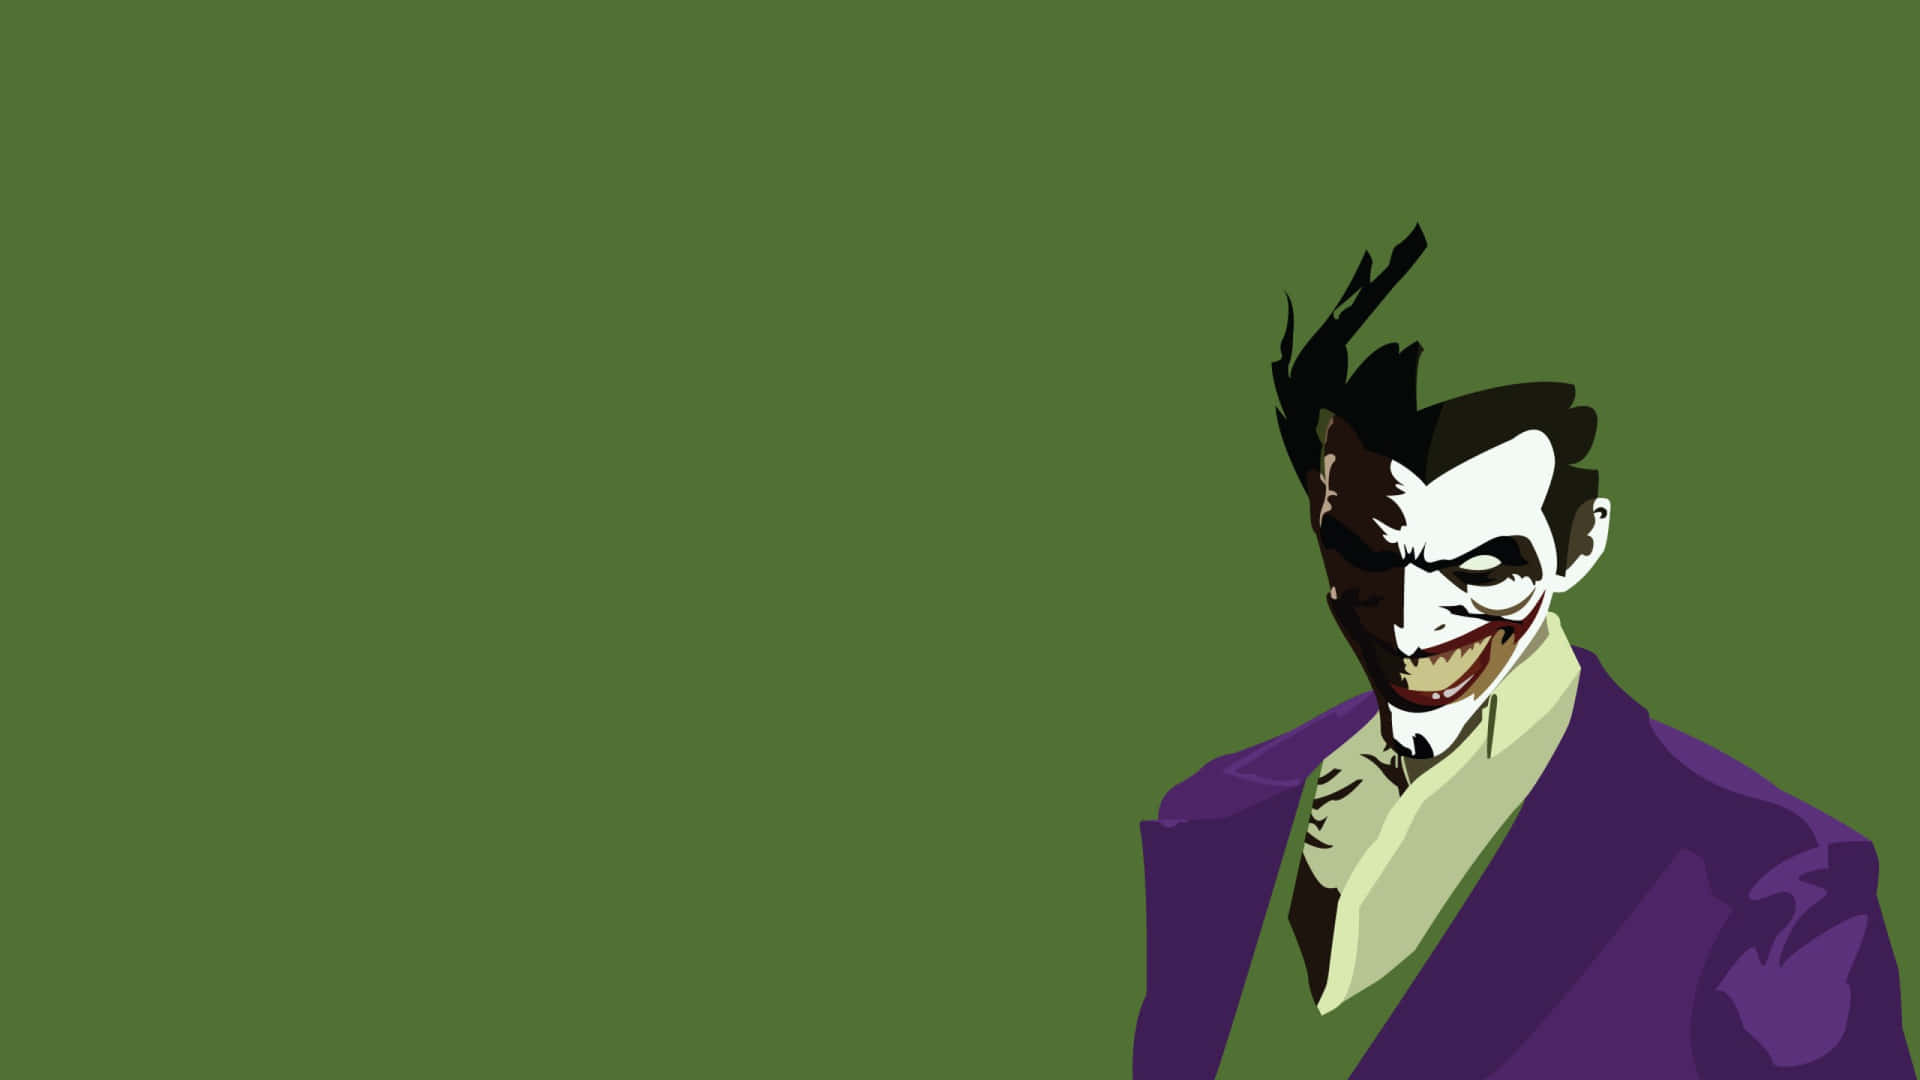 The Joker dazzles in his classic comic book layout. Wallpaper